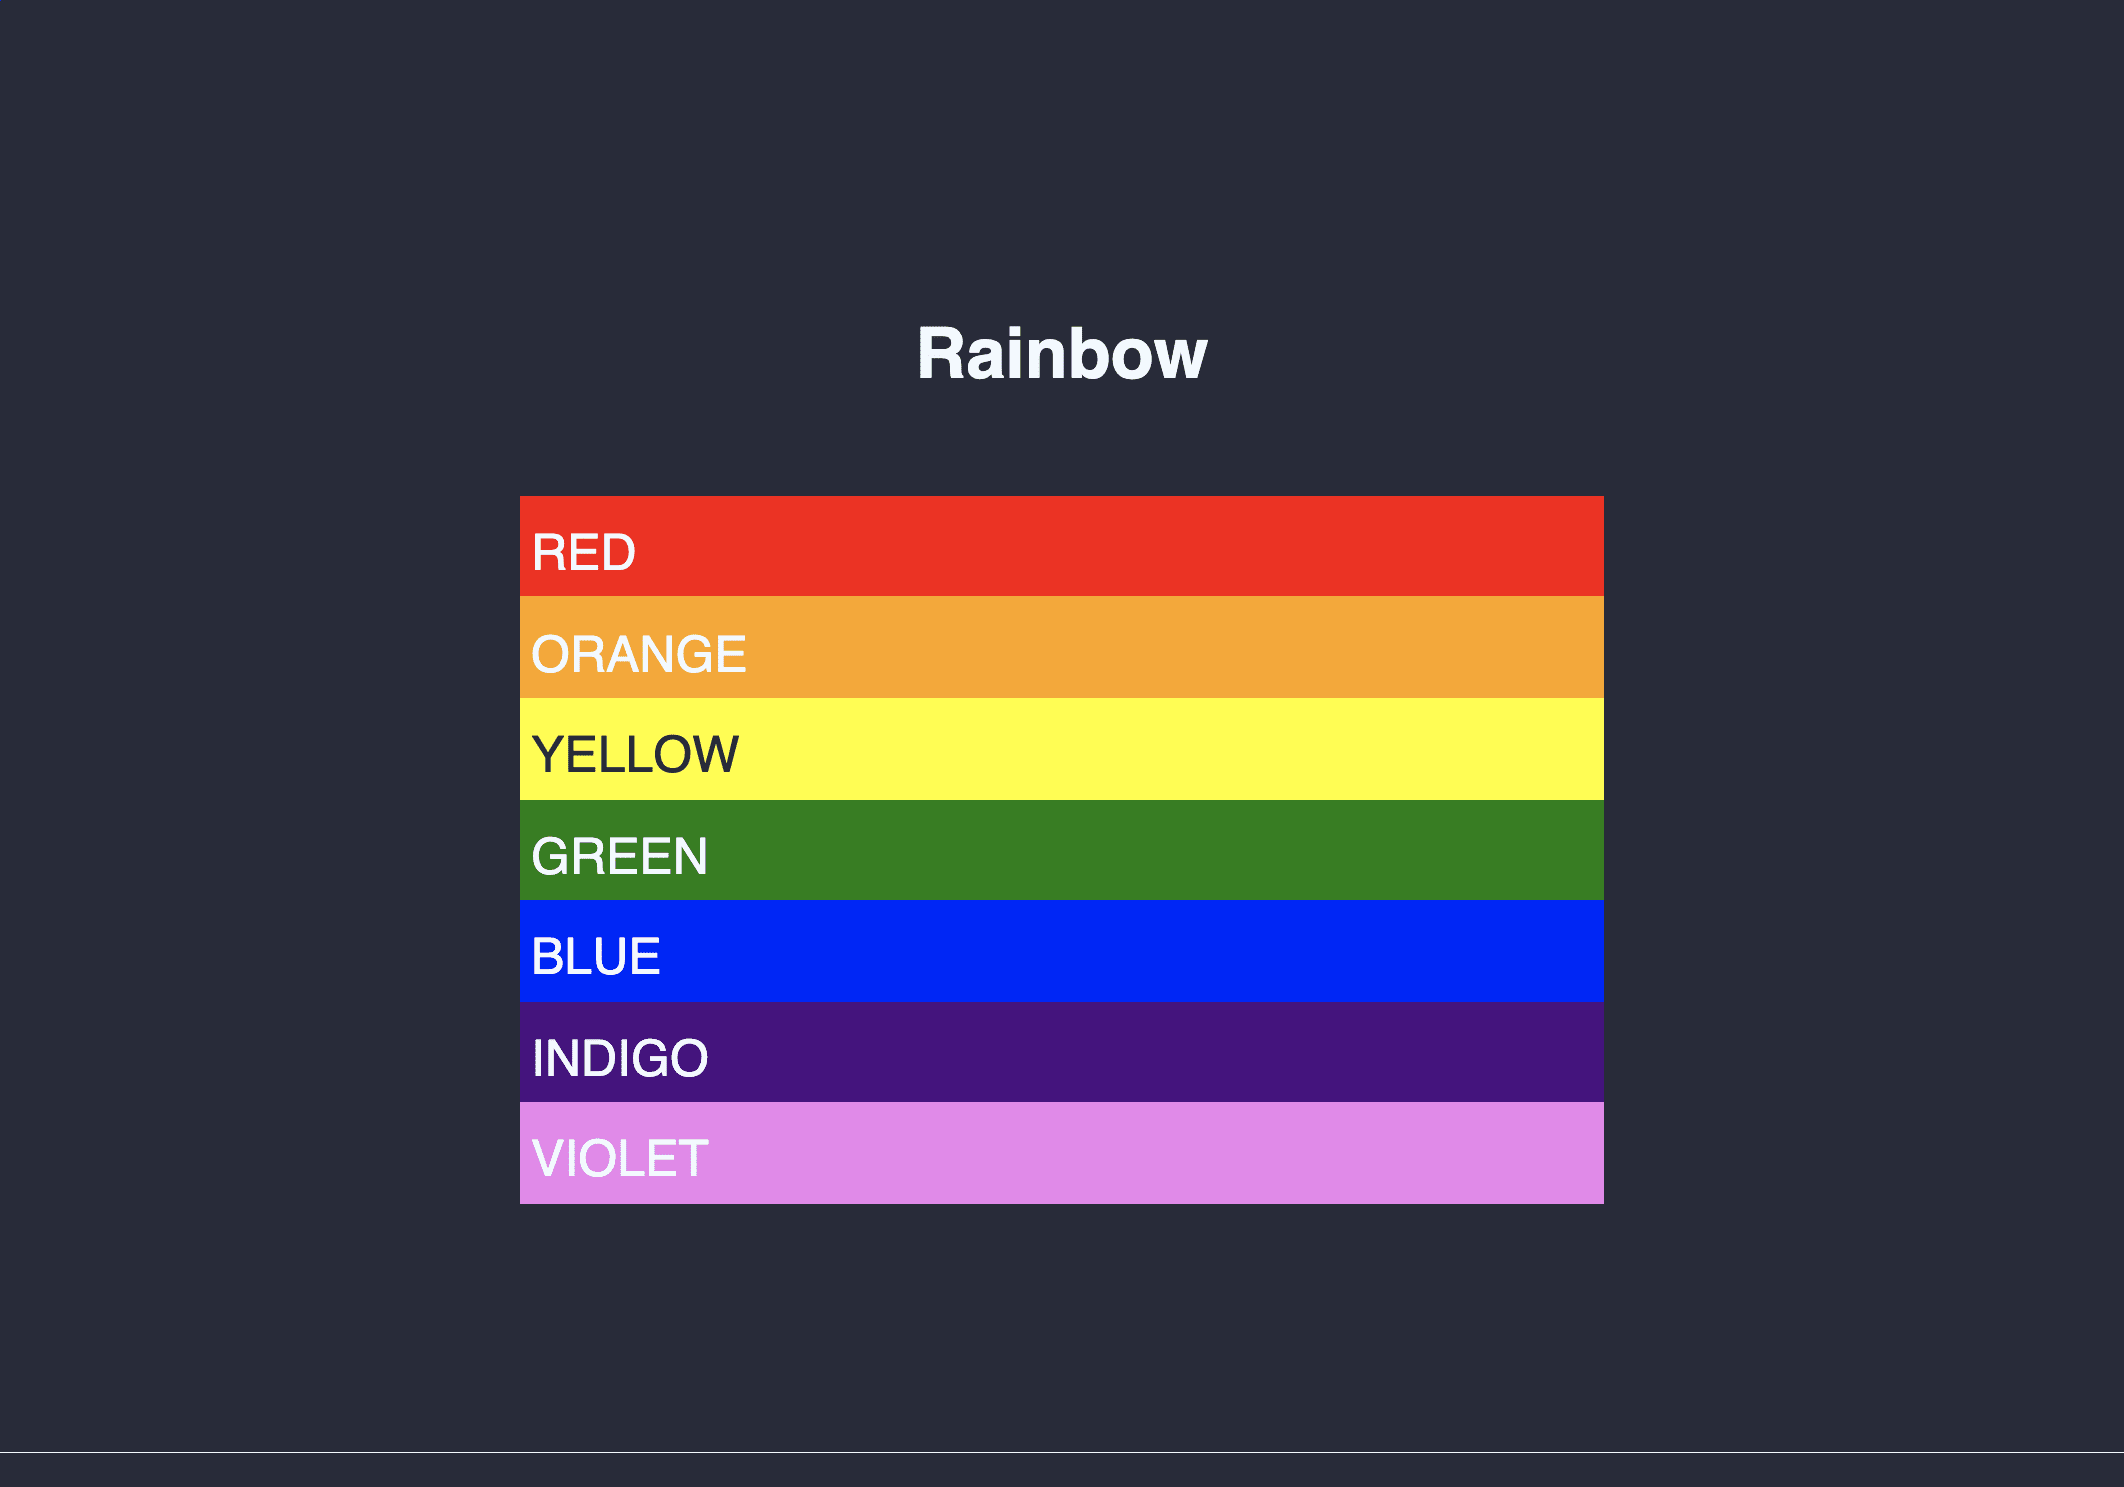 Testing rainbow with Cypress commands